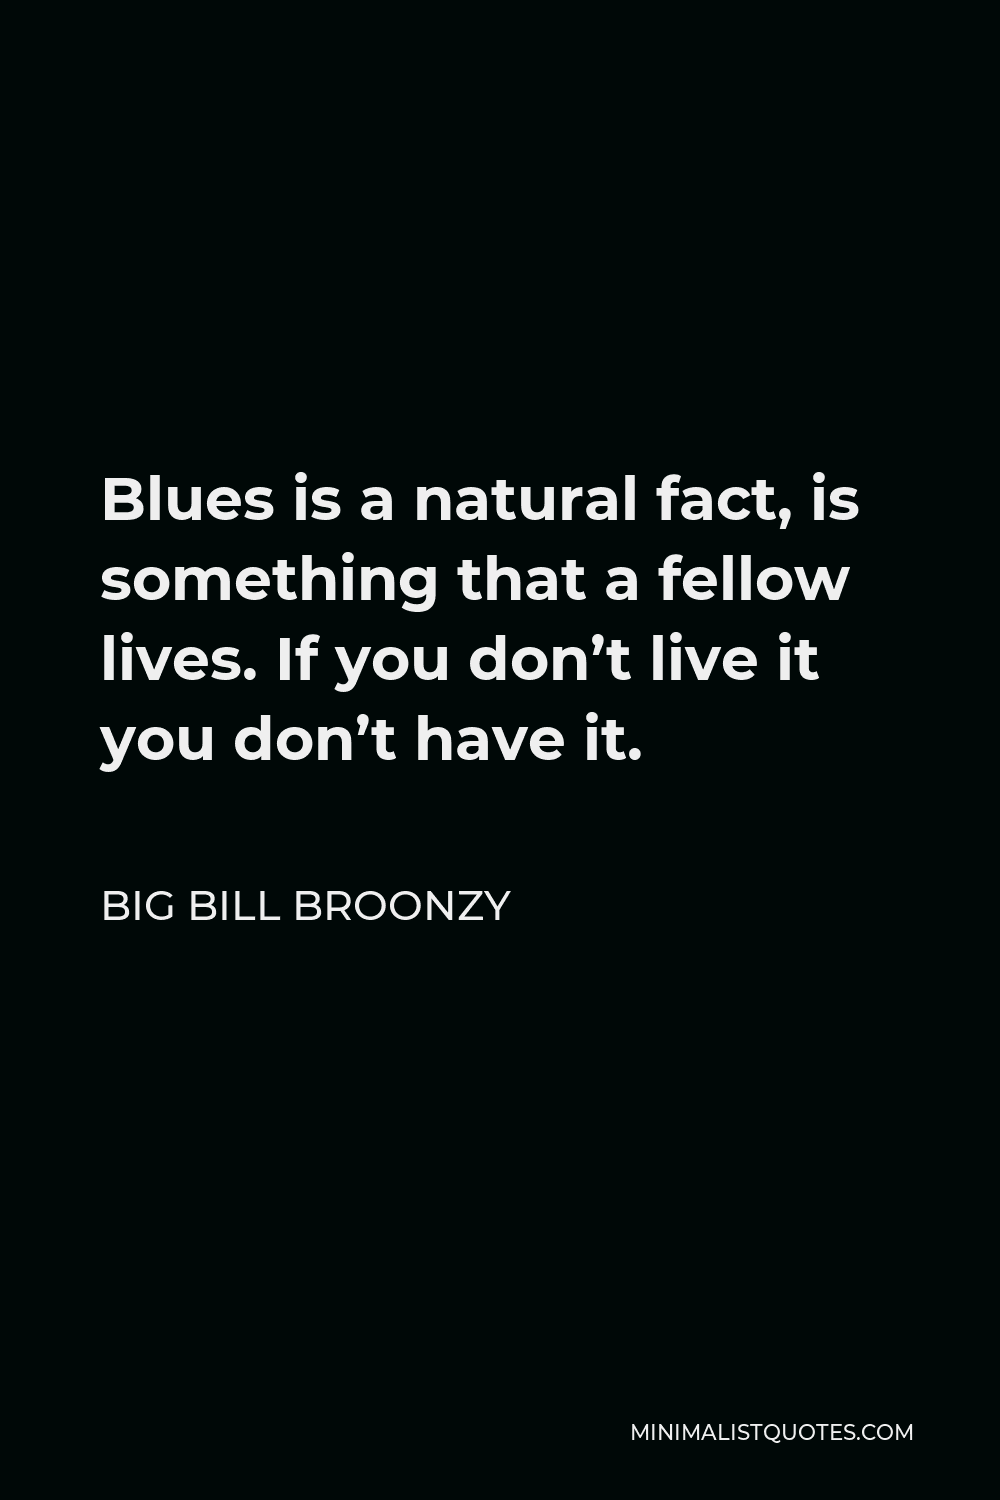 Big Bill Broonzy Quote - Blues is a natural fact, is something that a fellow lives. If you don’t live it you don’t have it.